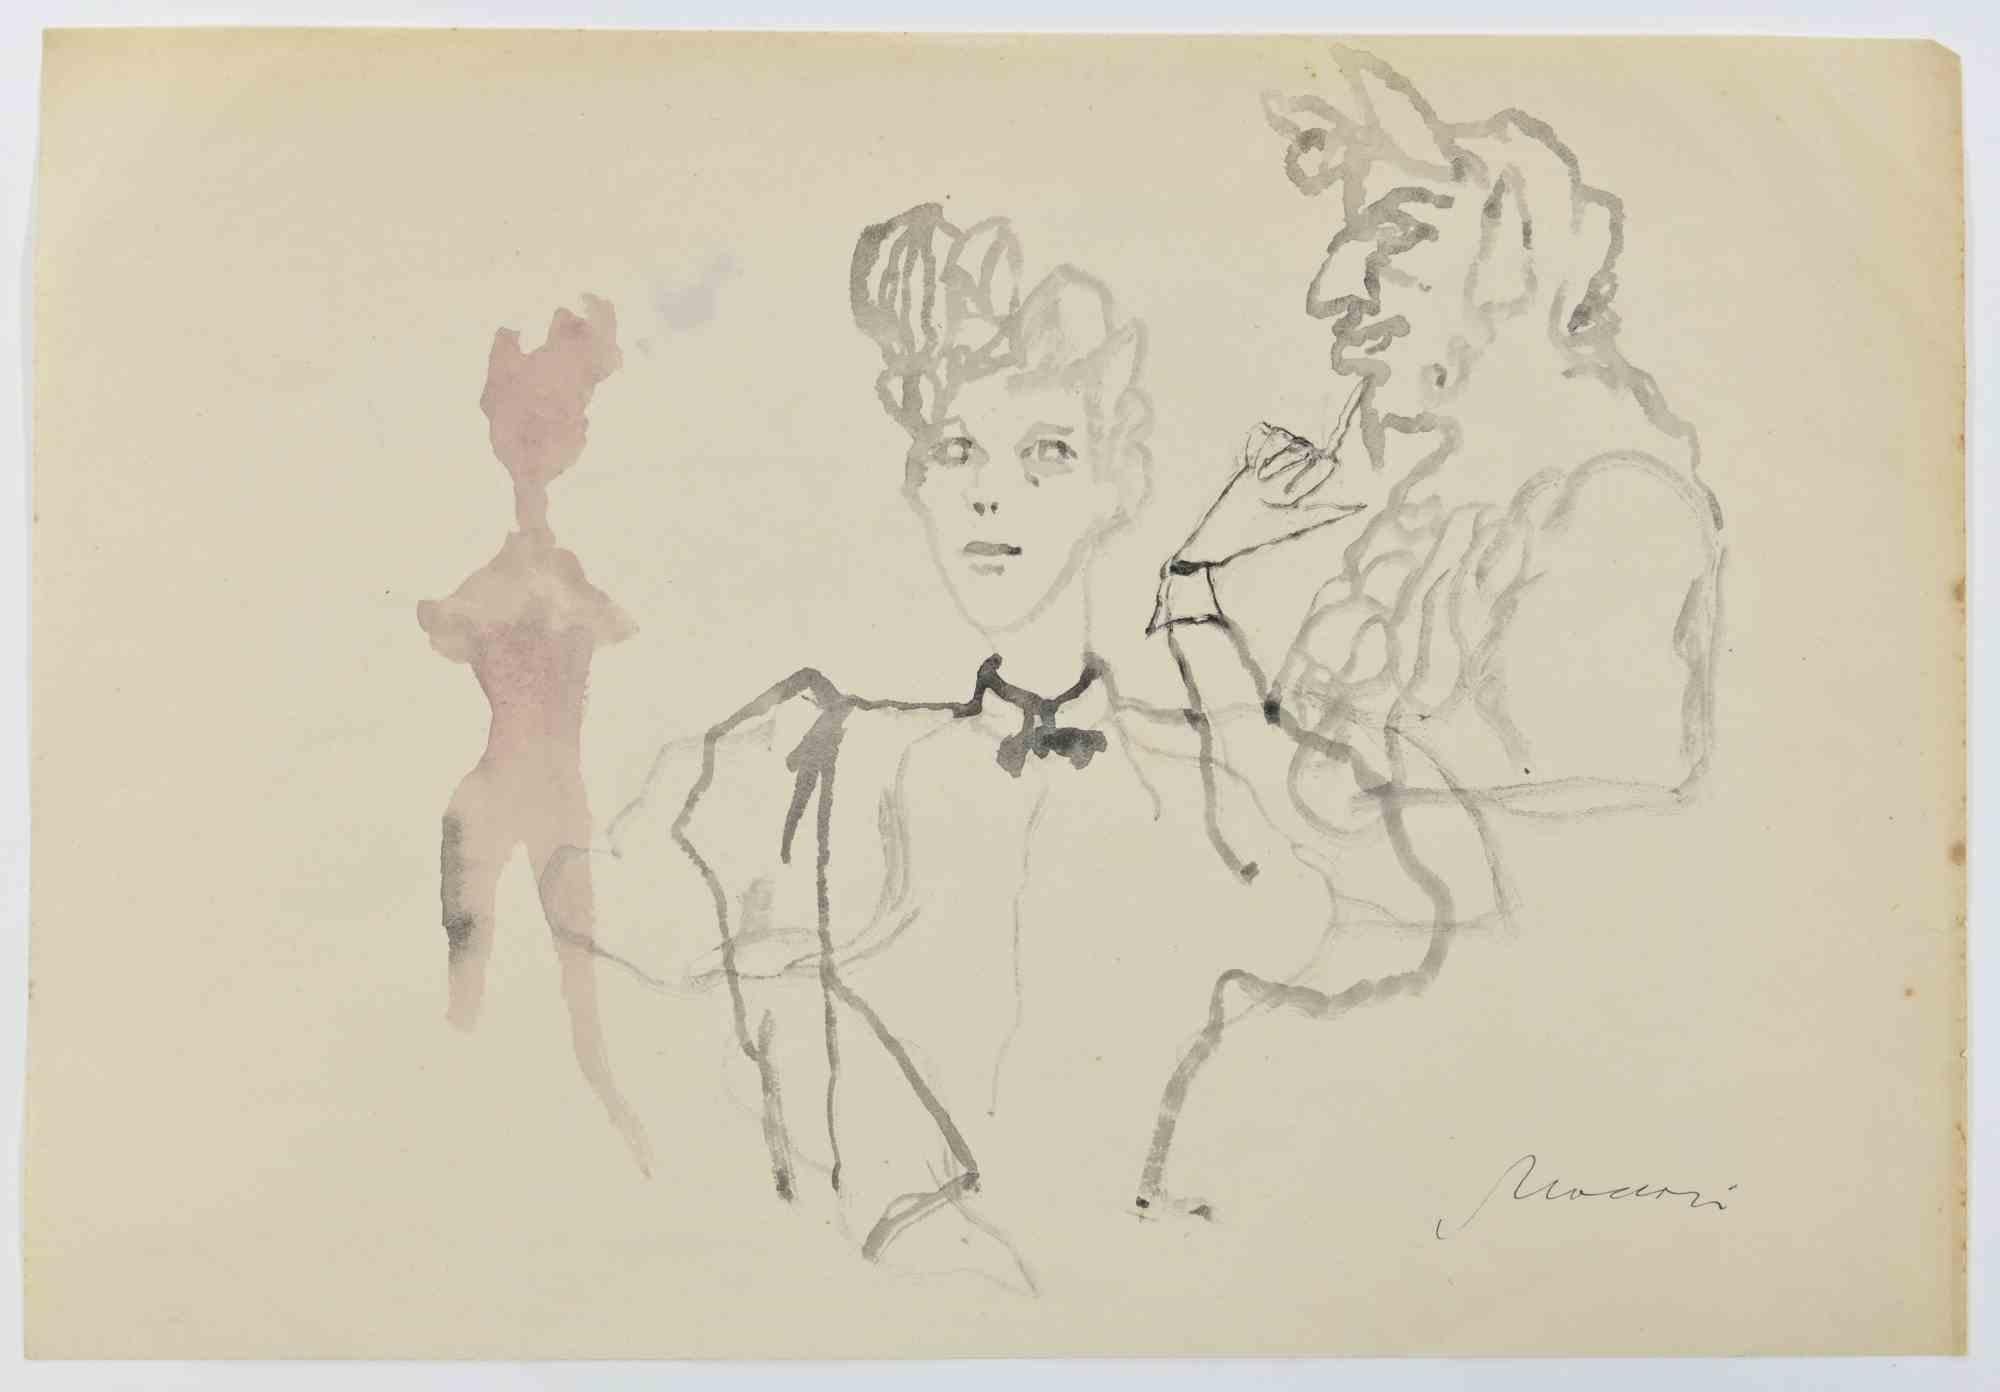 The Devil is a watercolor Drawing realized by Mino Maccari  (1924-1989) in the 1960s.

Hand-signed on the lower margin.

Good condition.

Mino Maccari (Siena, 1924-Rome, June 16, 1989) was an Italian writer, painter, engraver and journalist, winner